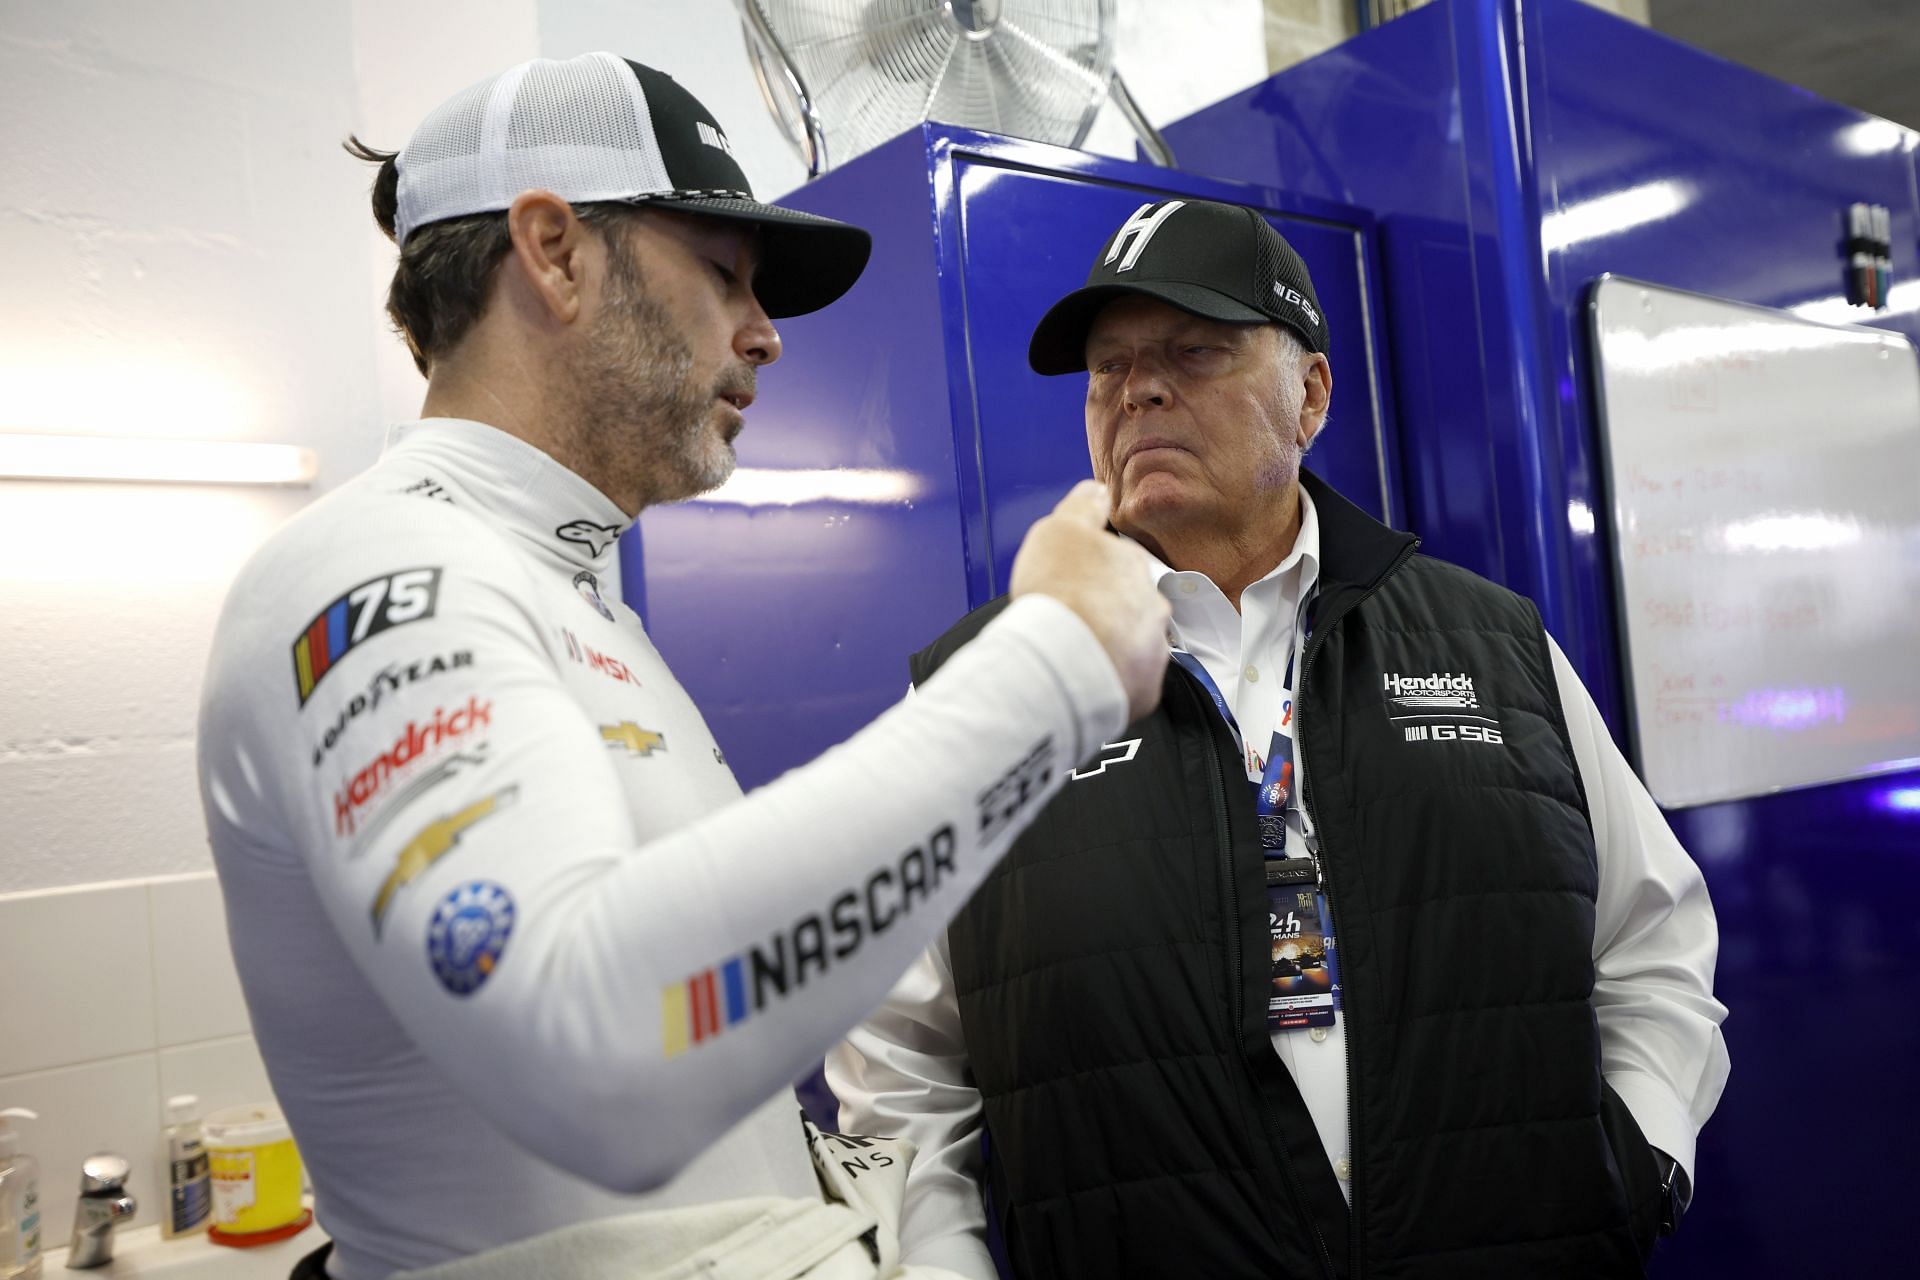 Jimmie Johnson talks with team owner Rick Hendrick ahead of 24 Hours of Le Mans